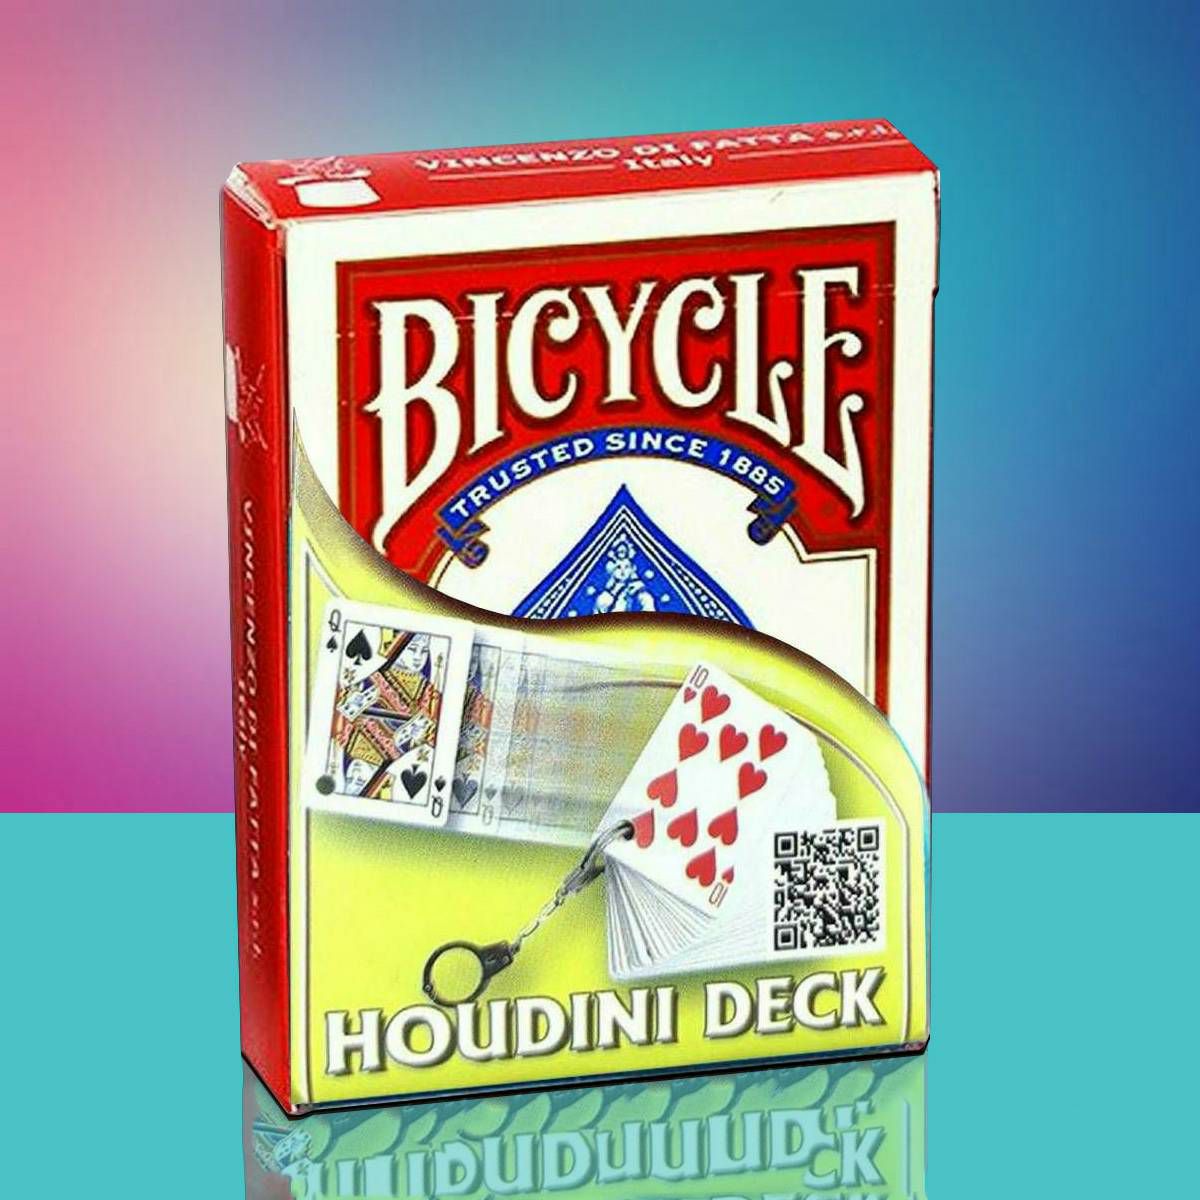 Bicycle Houdini Deck Red